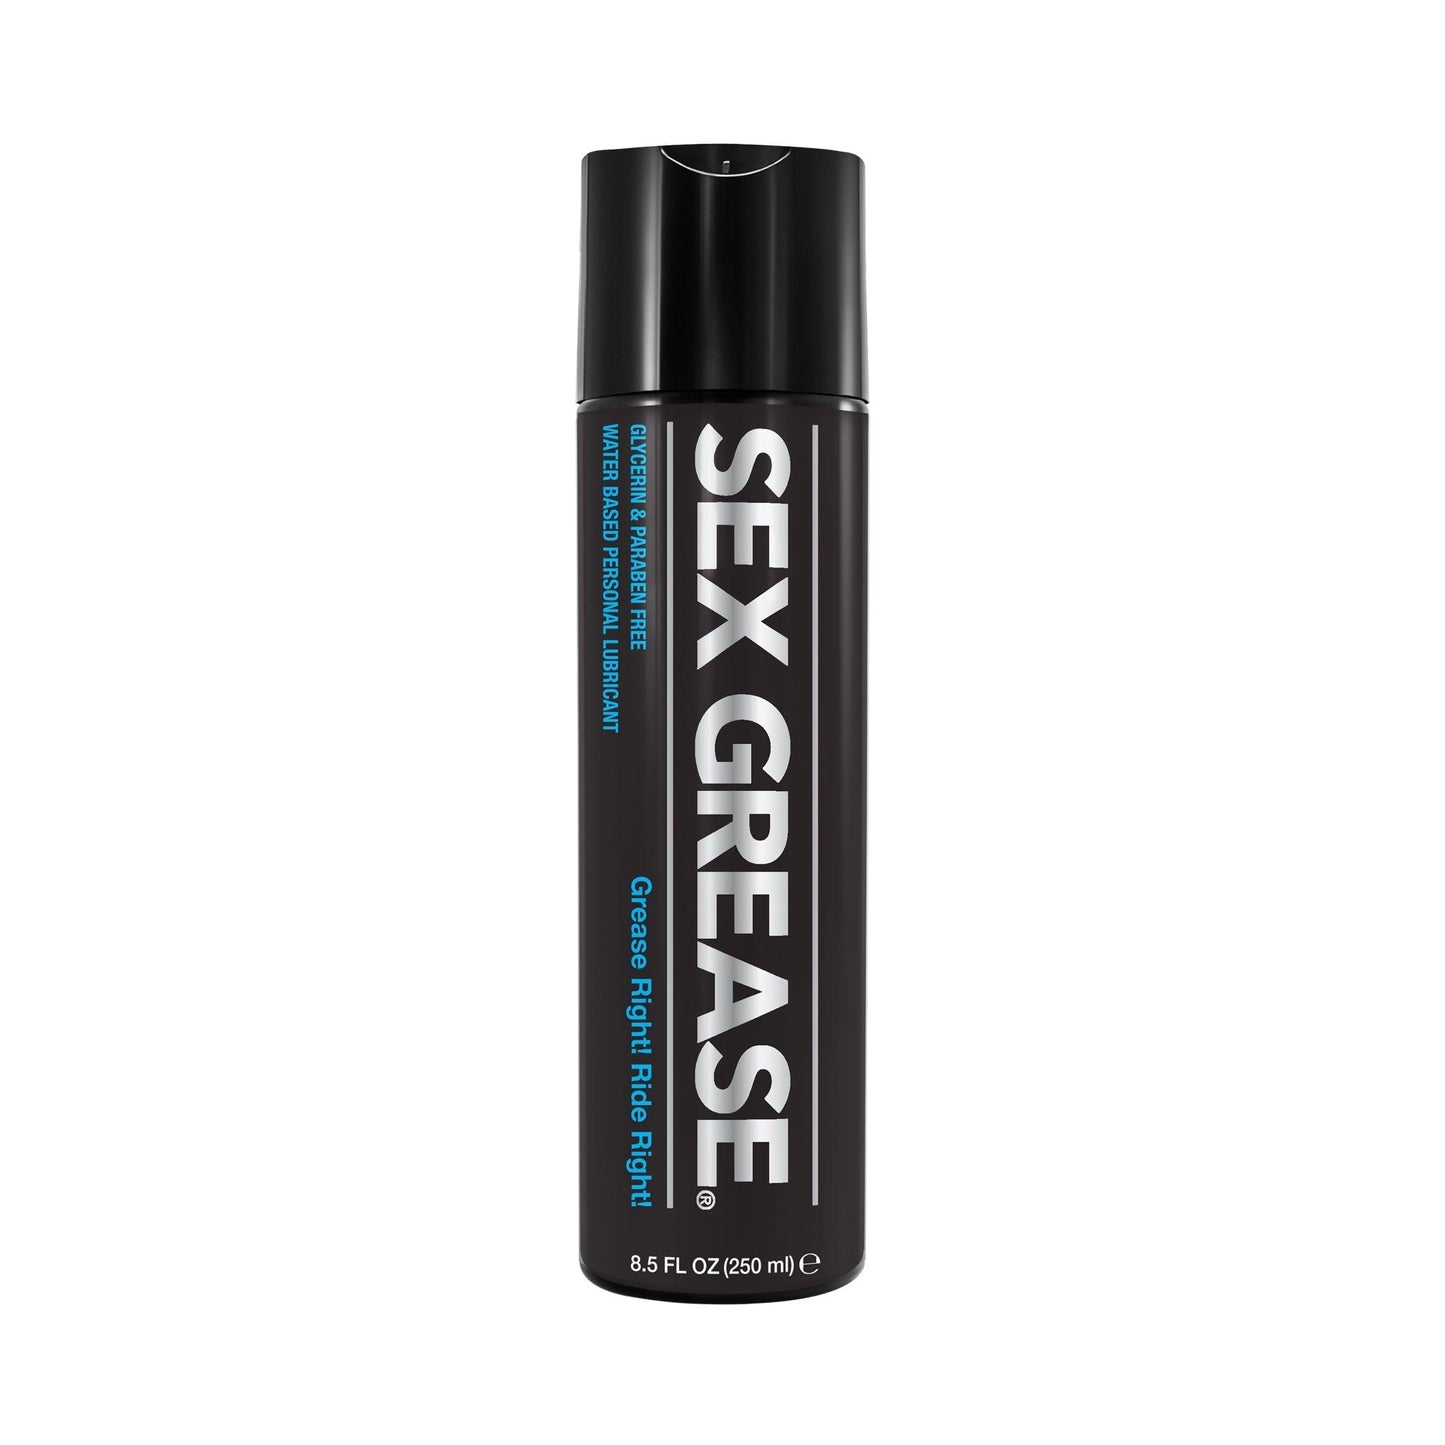 Sex Grease Glycerin & Paraben Free Water Based Personal Lubricant - sexlube.com